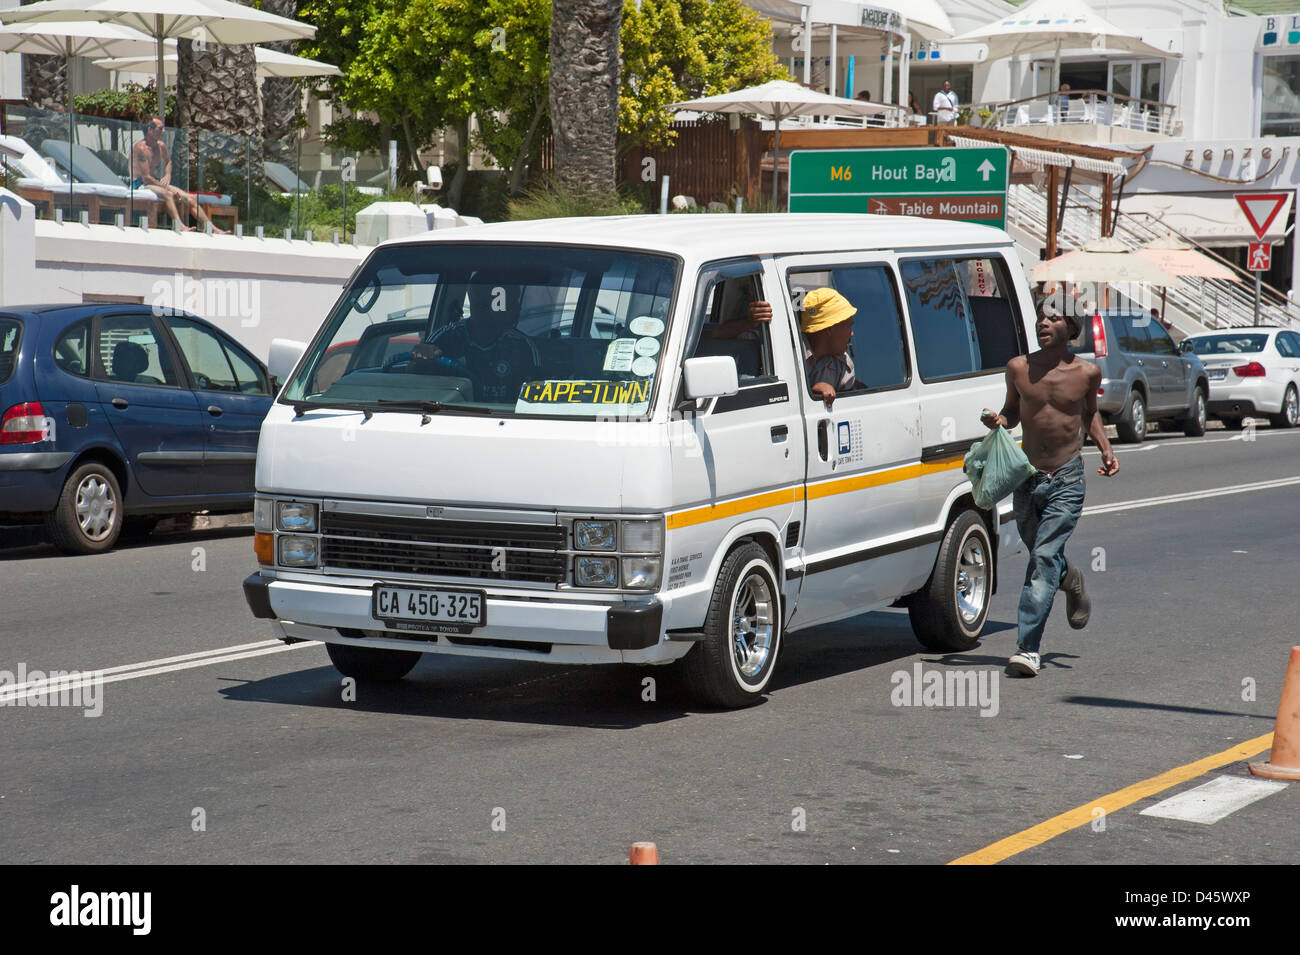 Man carrying plastic bag running for a 'black' taxi in Camps Bay Western Cape South Africa Stock Photo